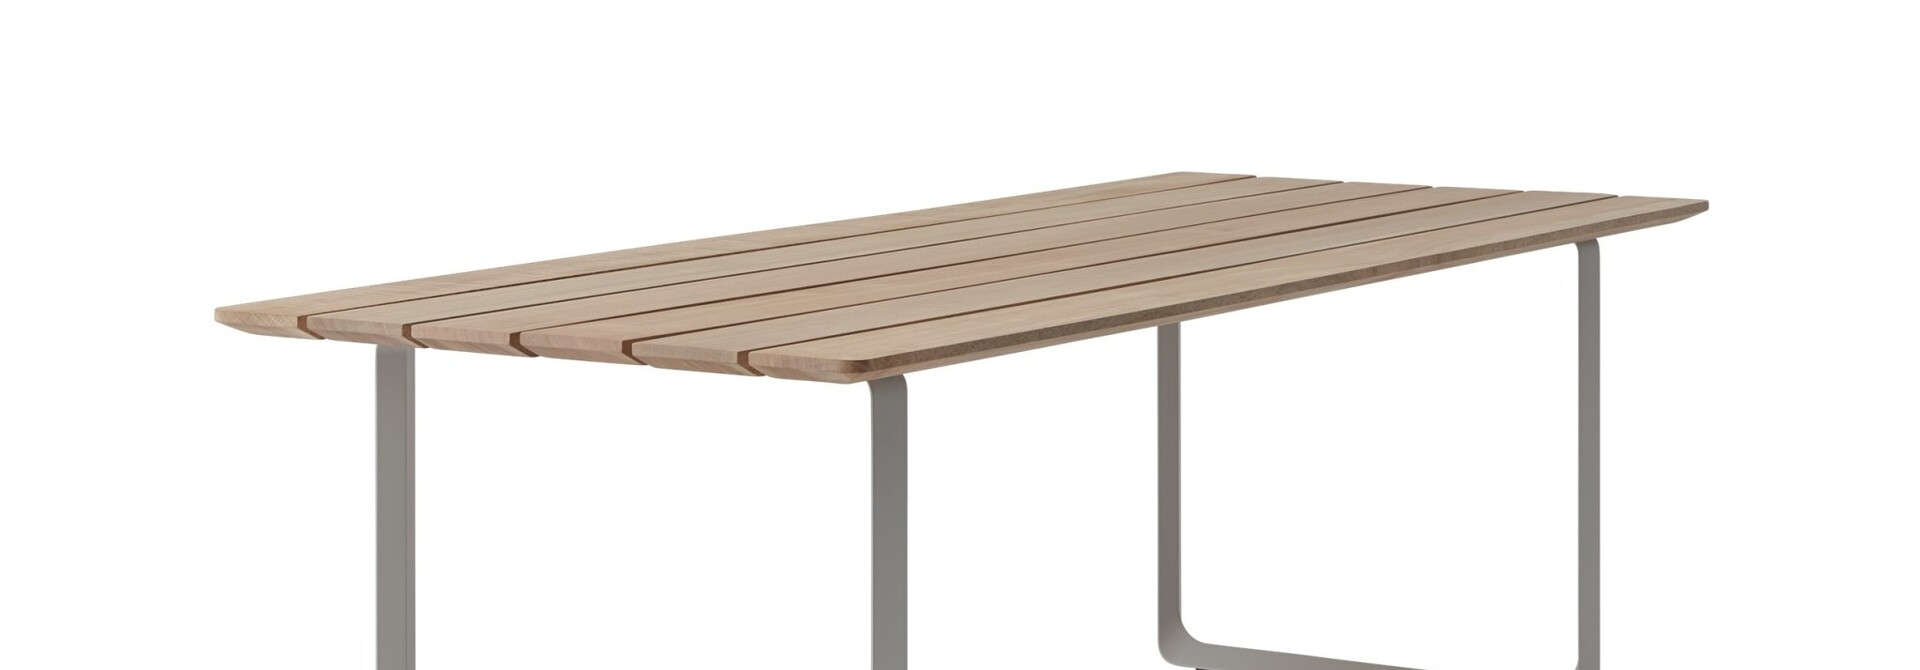 70/70 Table Outdoor